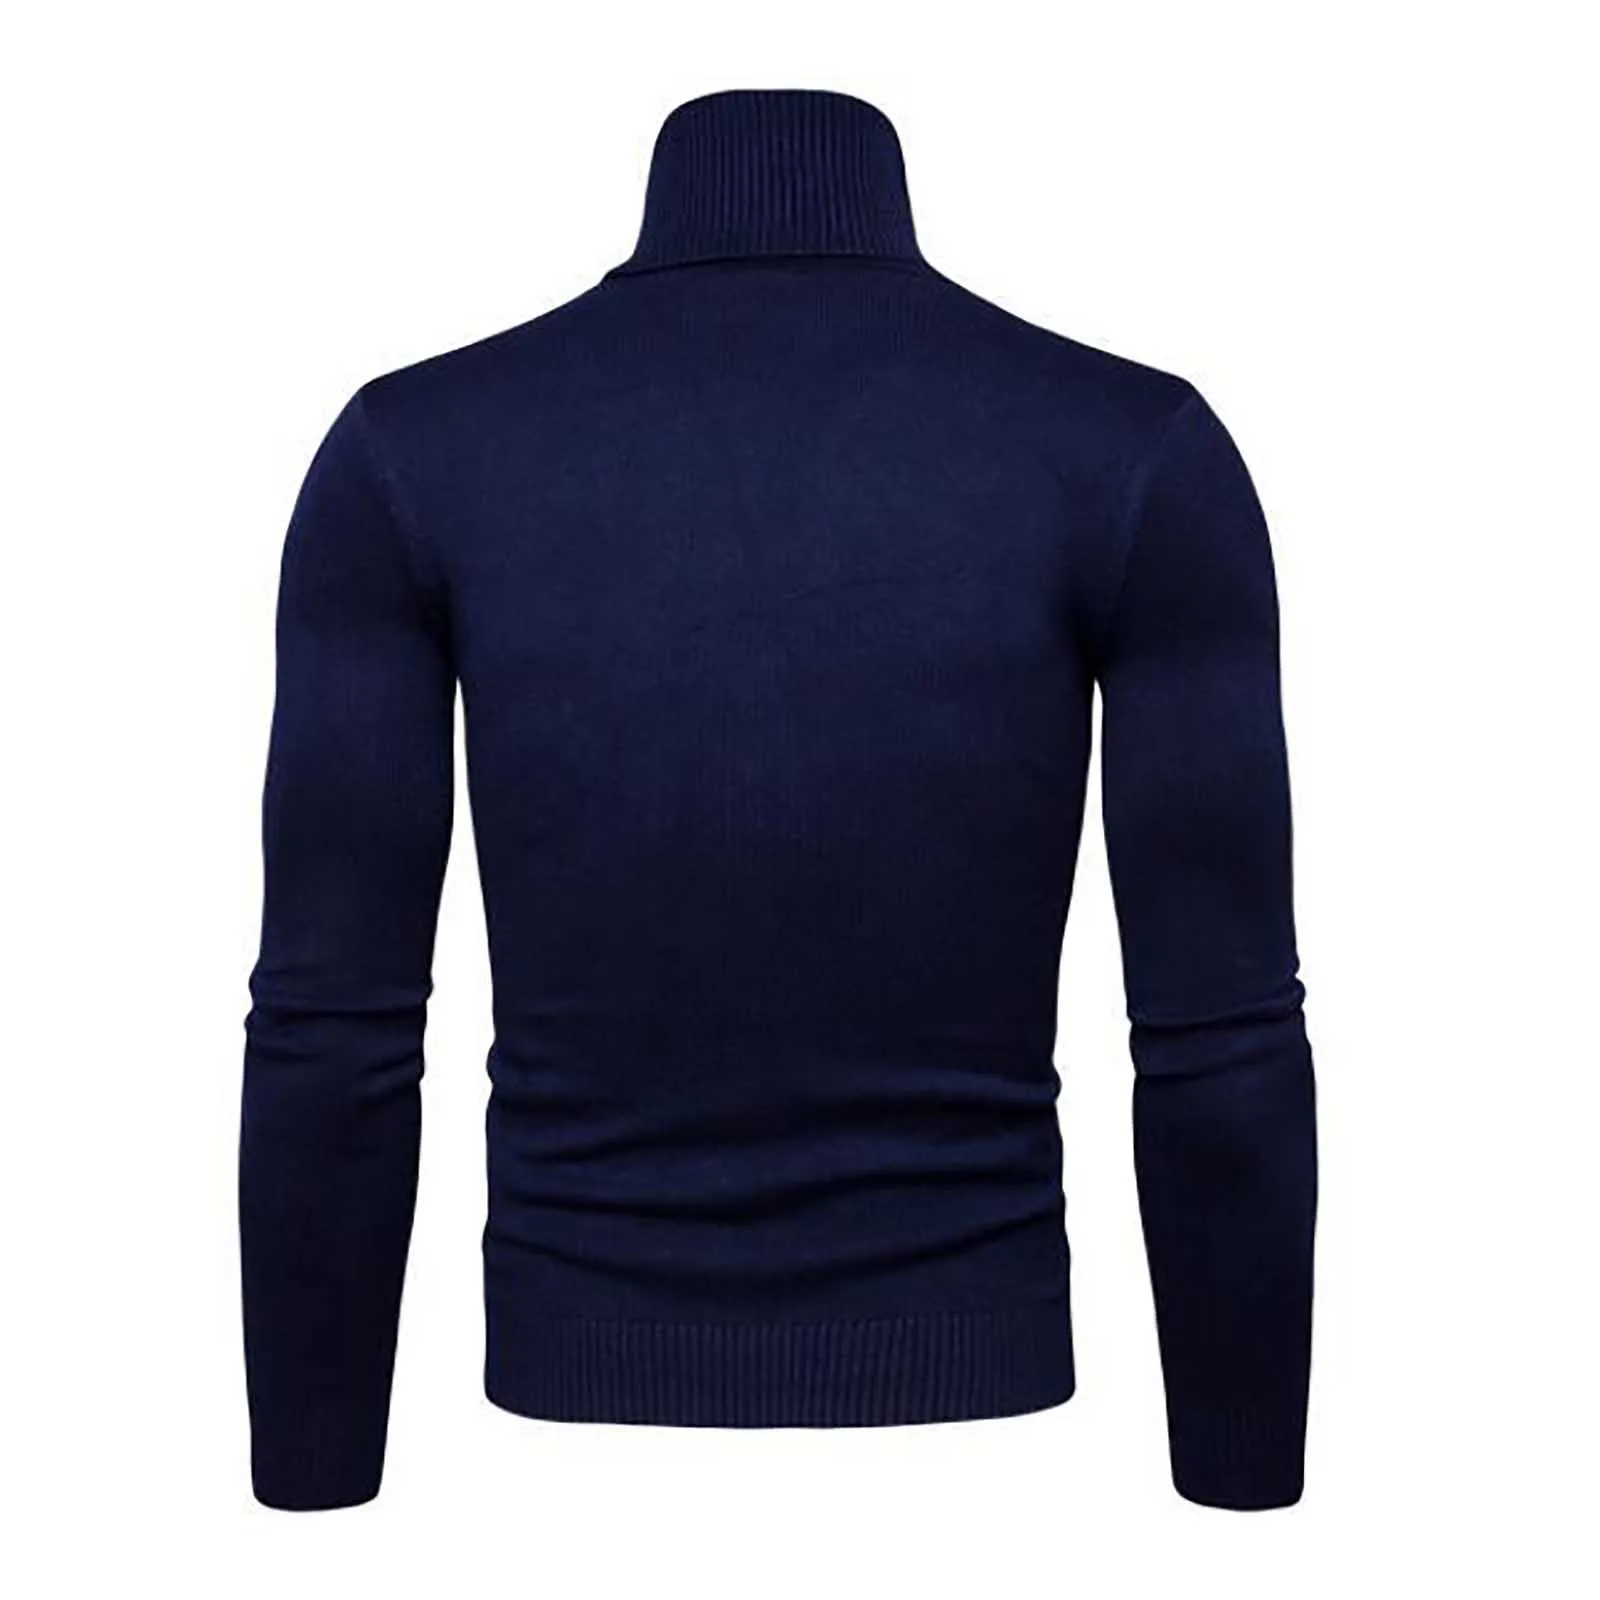 Mens Turtleneck Sweaters Red Wine Pullovers Sweater For Man Office Cotton Knitted Clothing Male Sweaters Pull Hombre Tops turtleneck sweater men